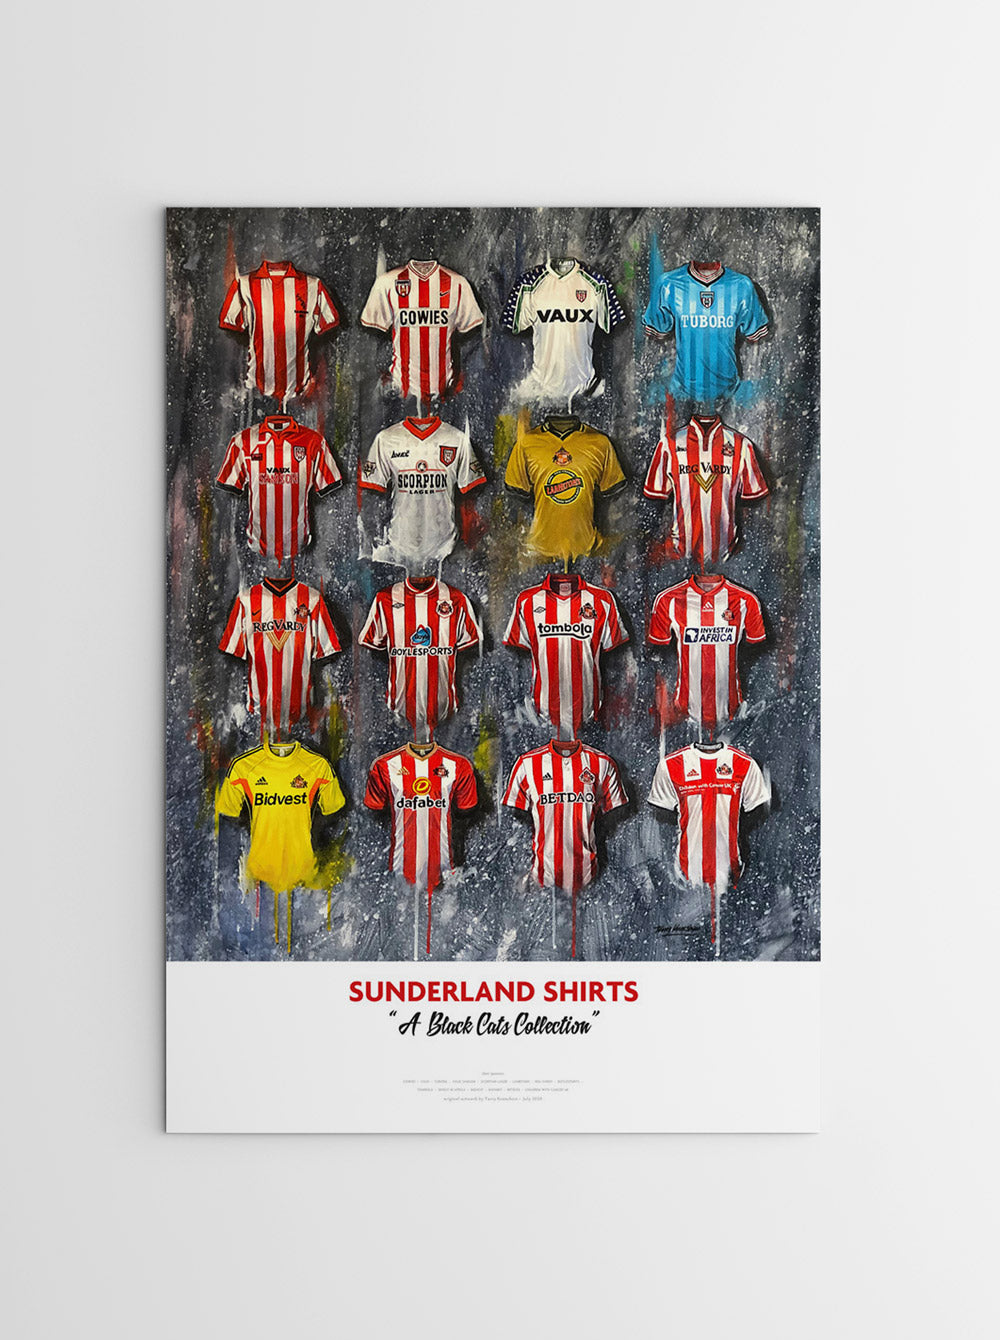 A limited edition A2 print by artist Terry Kneeshaw, featuring 16 iconic jerseys from the history of the Sunderland football team. The jerseys are arranged in a 4x4 grid pattern and are labeled with the corresponding year and design. The artwork has a vintage feel, with muted colors and a slightly distressed texture. The jerseys include classic designs such as the red and white striped shirt and the predominantly red shirt with a black stripe, as well as recent designs. Perfect for any Sunderland fan.